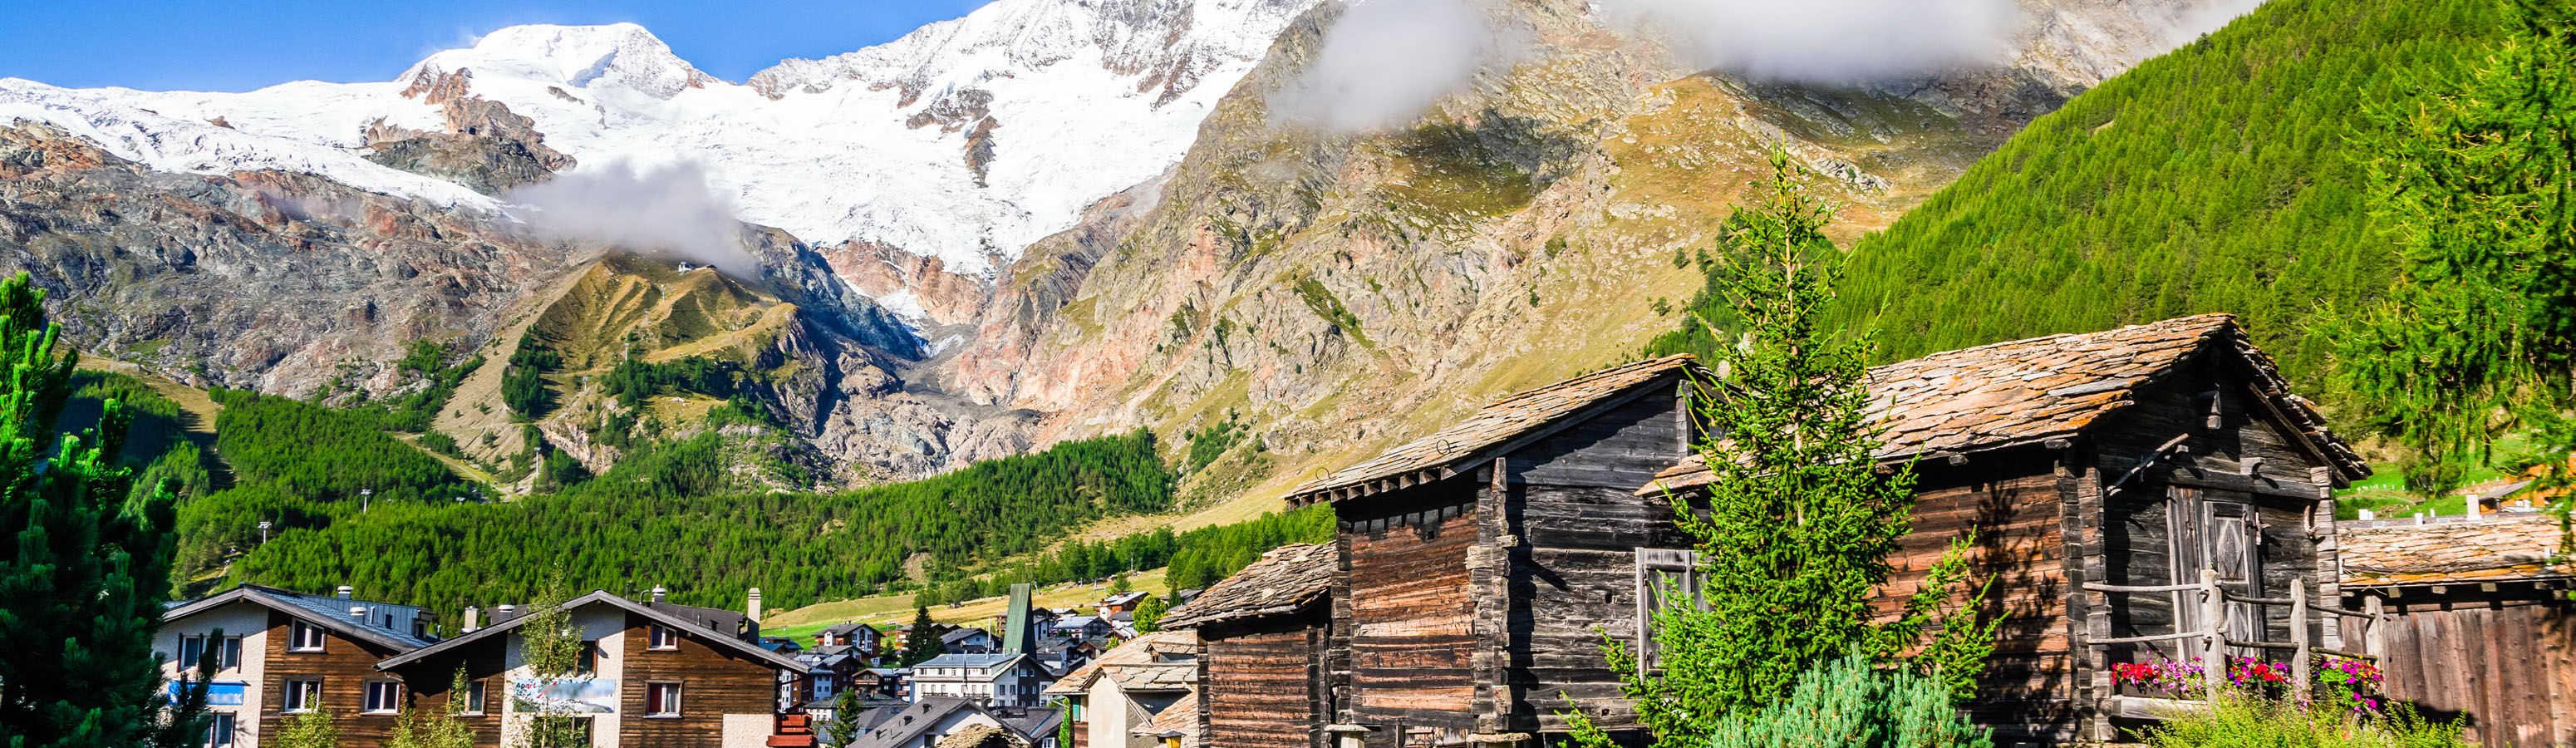 Do you suffer from asthma? Saas Fee is waiting for you with open arms!